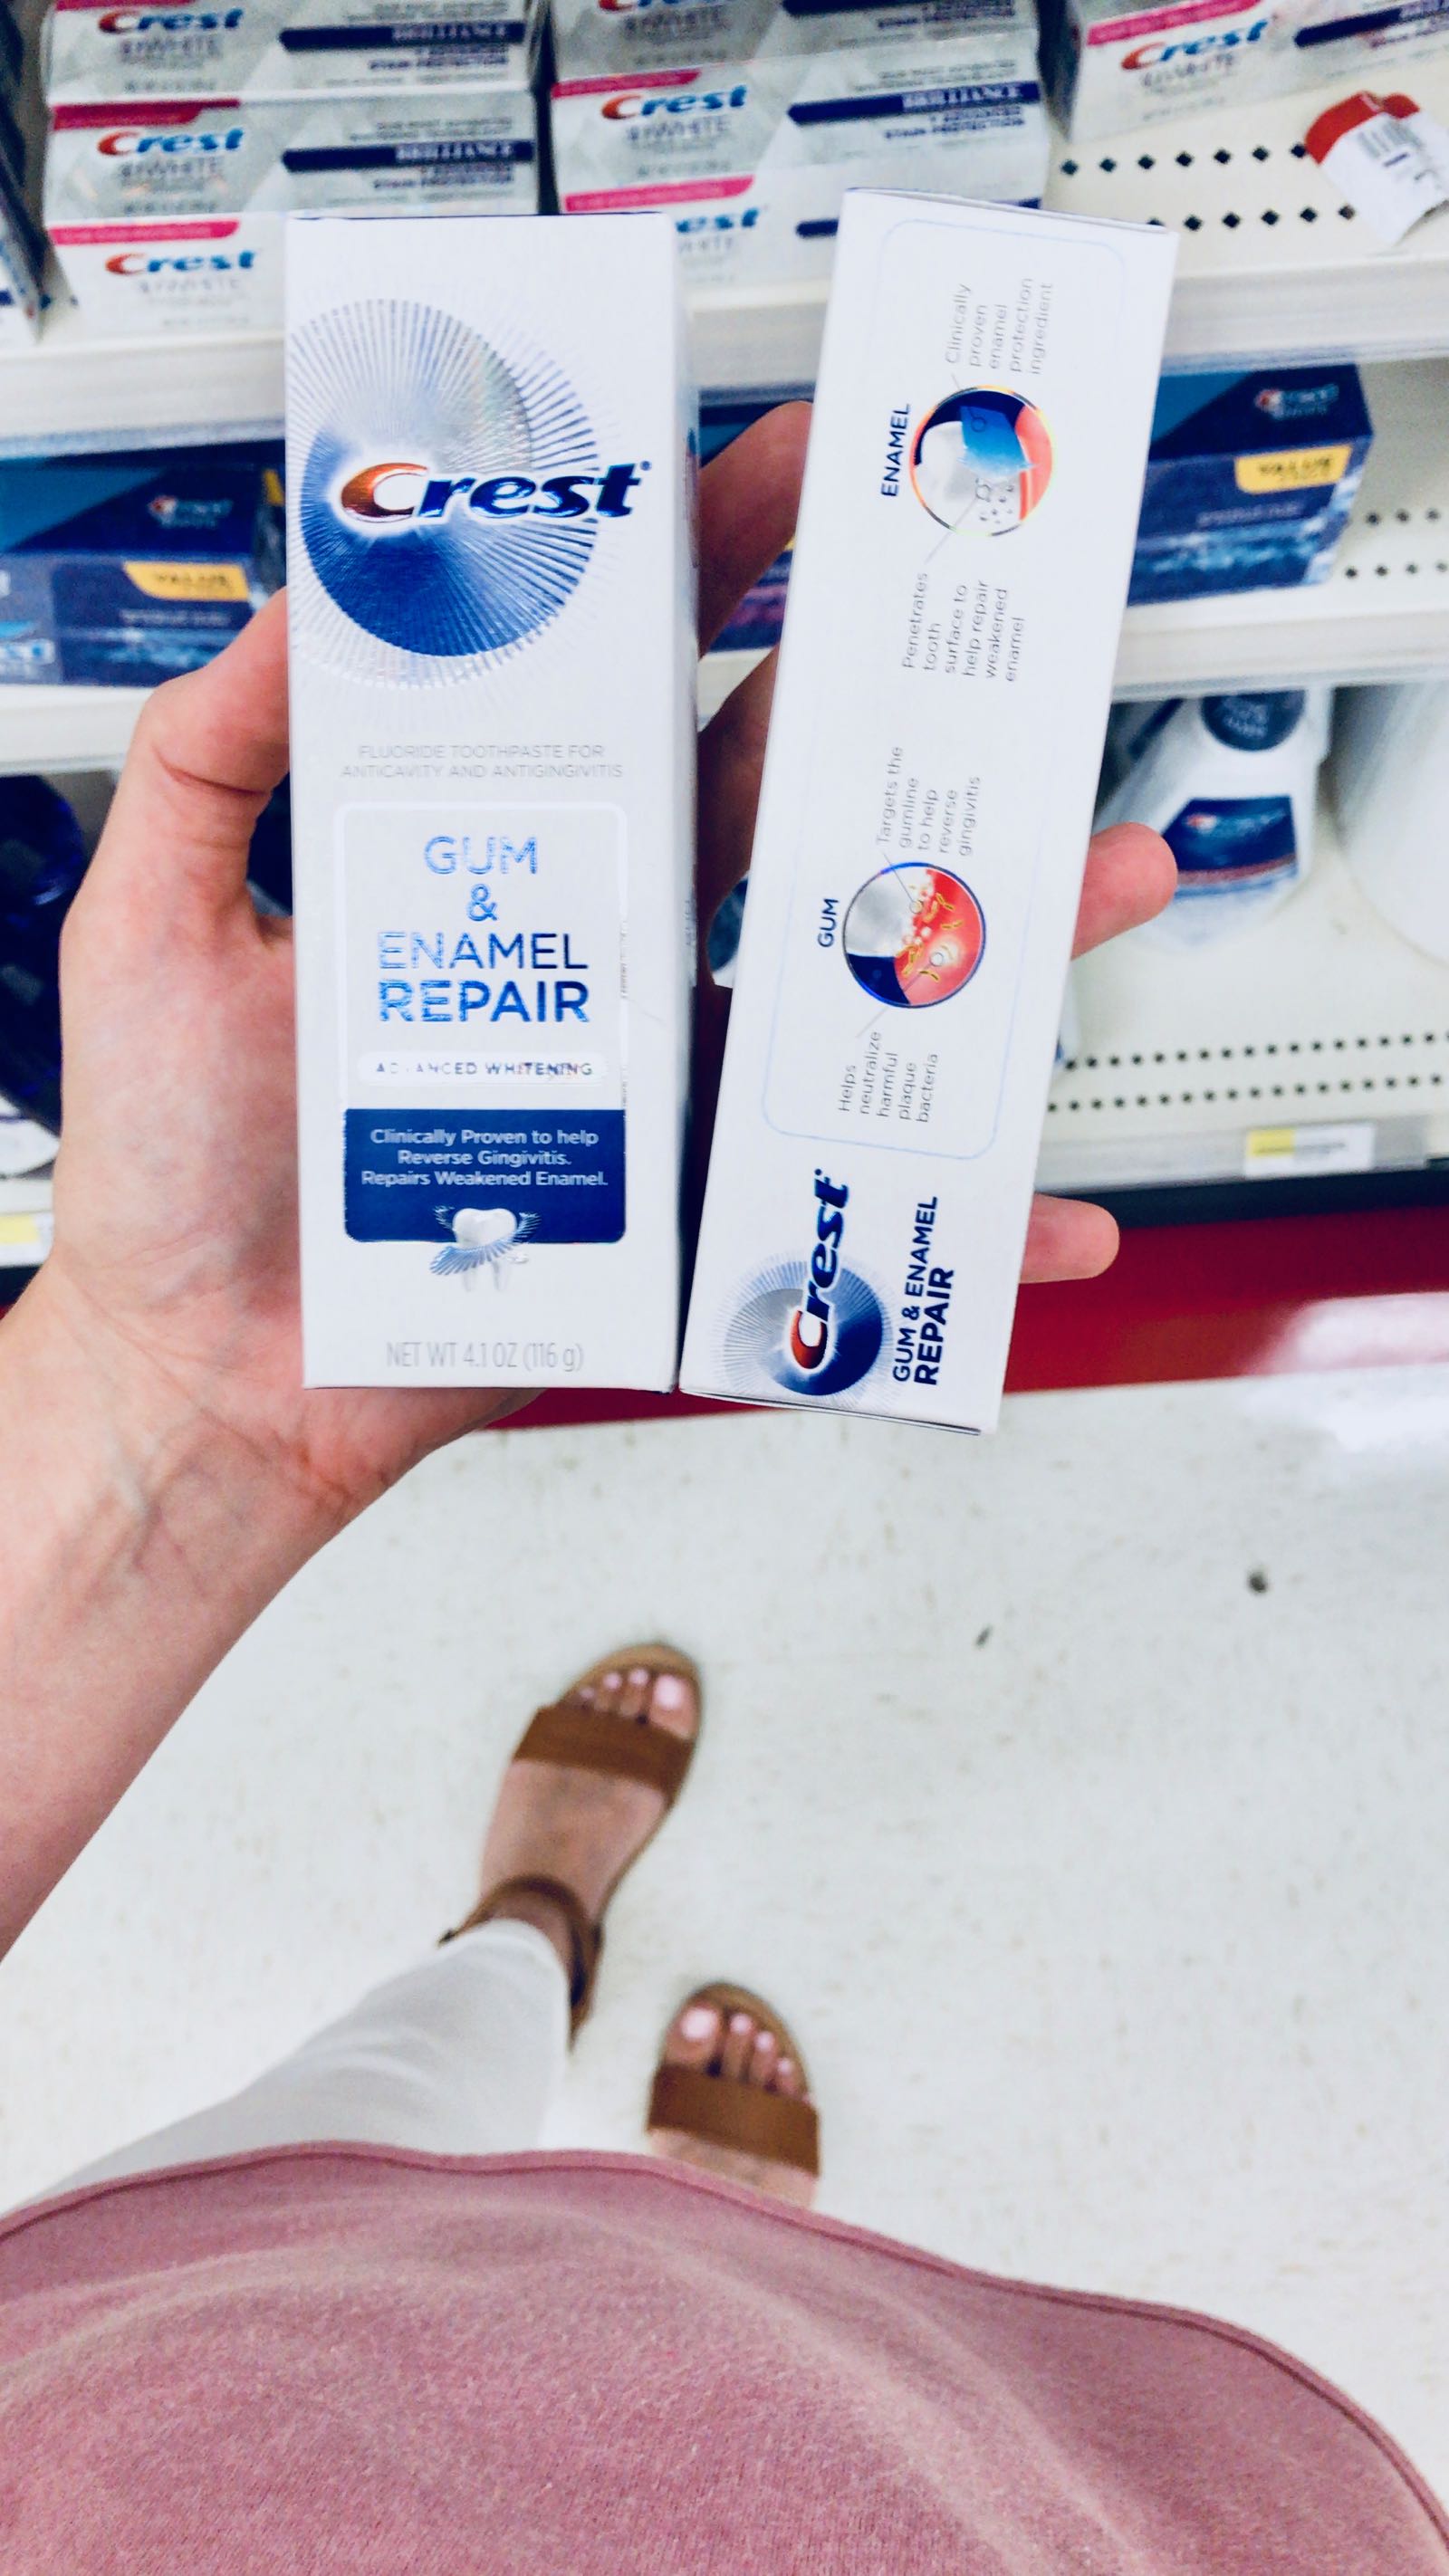 Save $2 on new Crest Gum and Enamel Repair at Target - click here to get the deal!